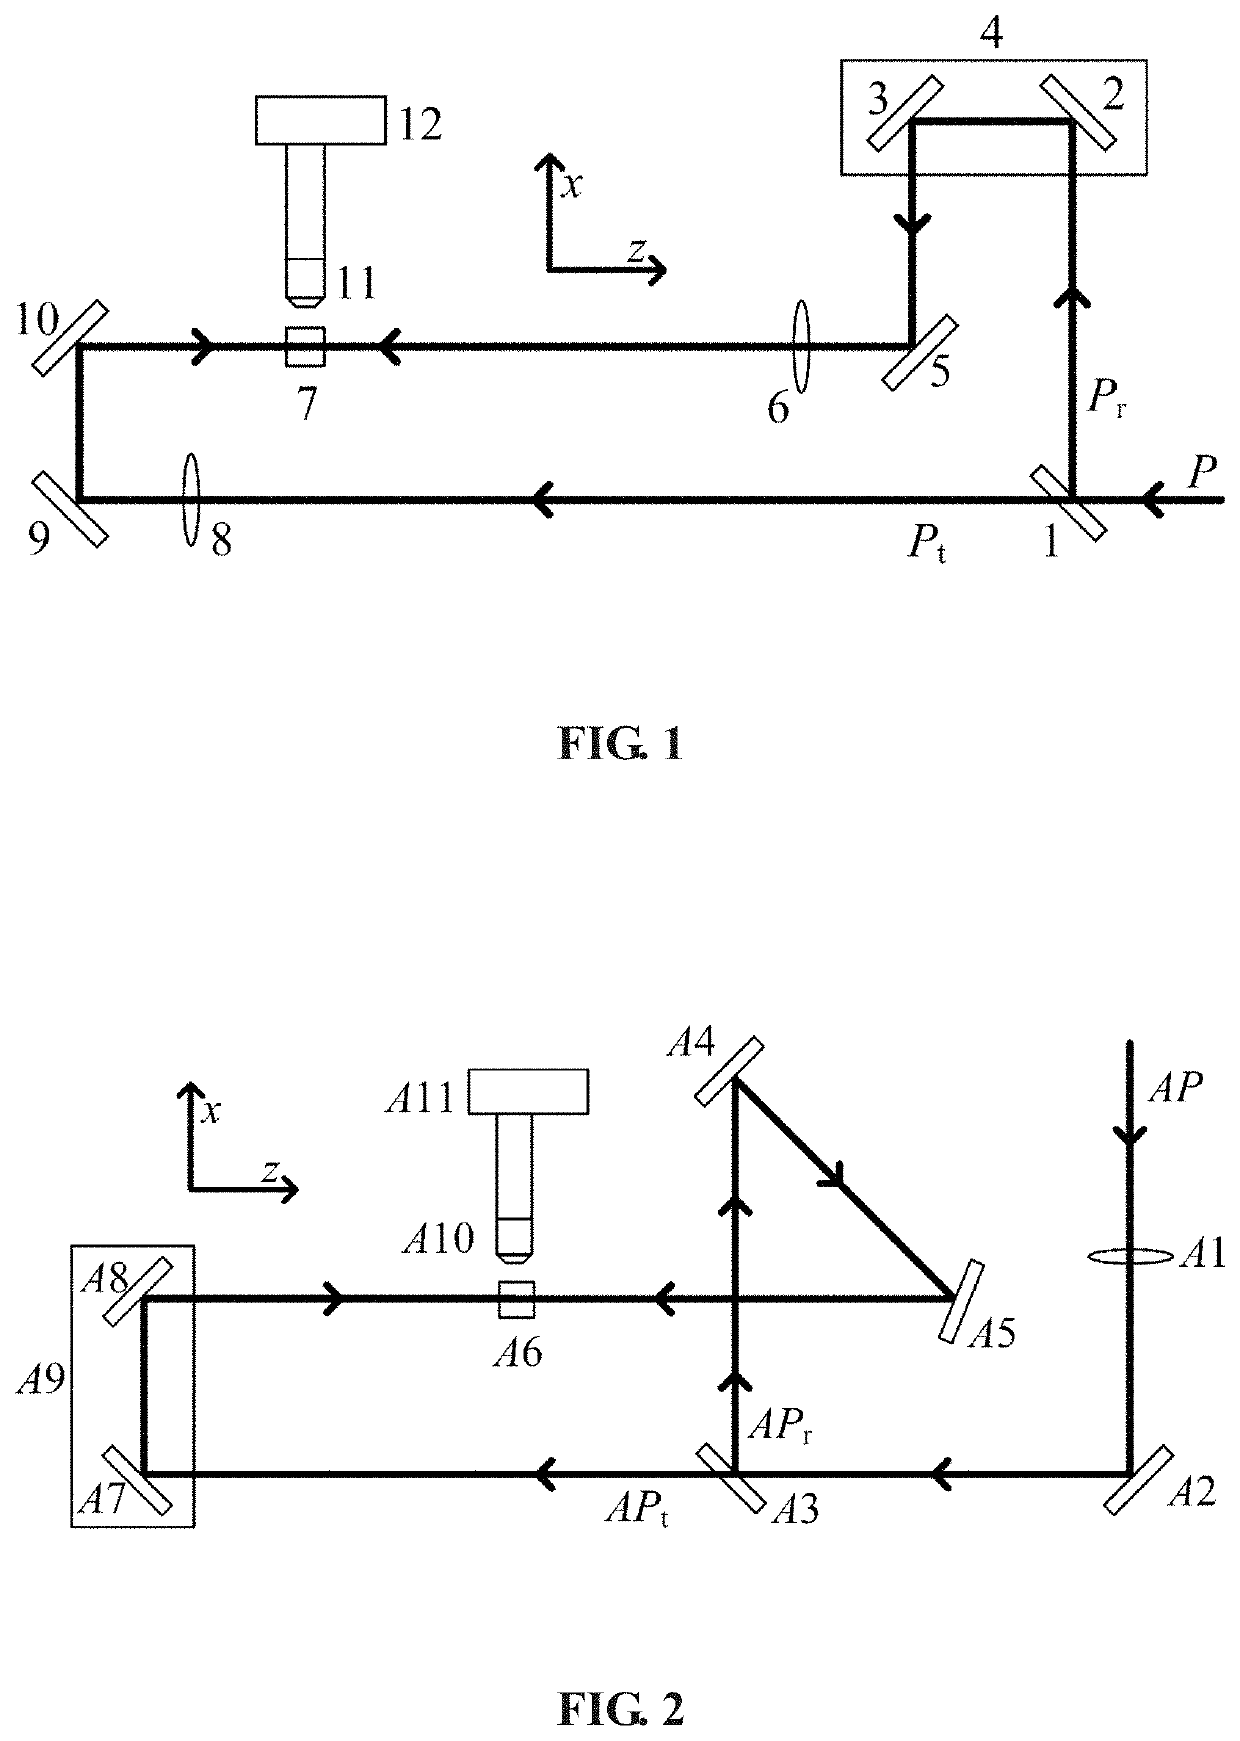 Single shot autocorrelator for measuring the duration of an ultrashort pulse in the far field